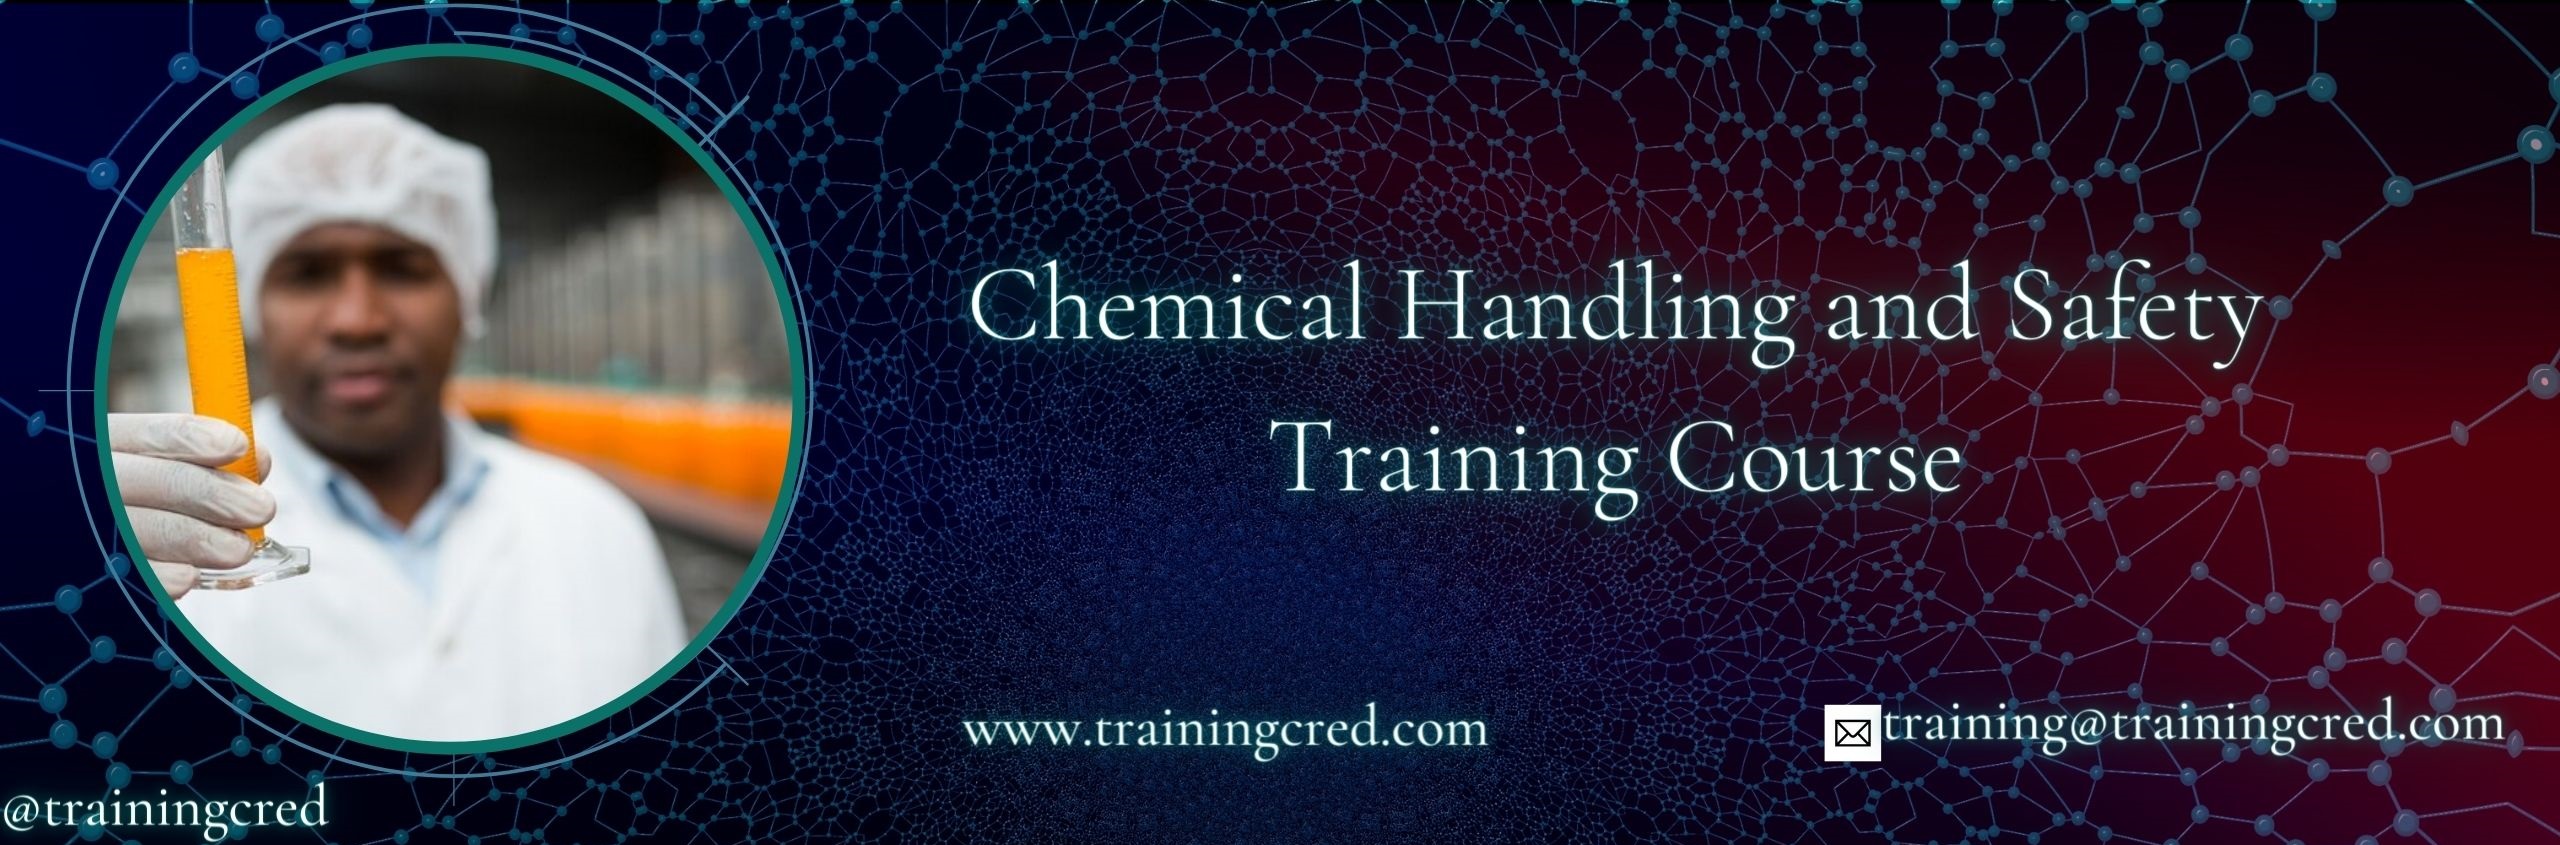 Chemical Handling and Safety Training